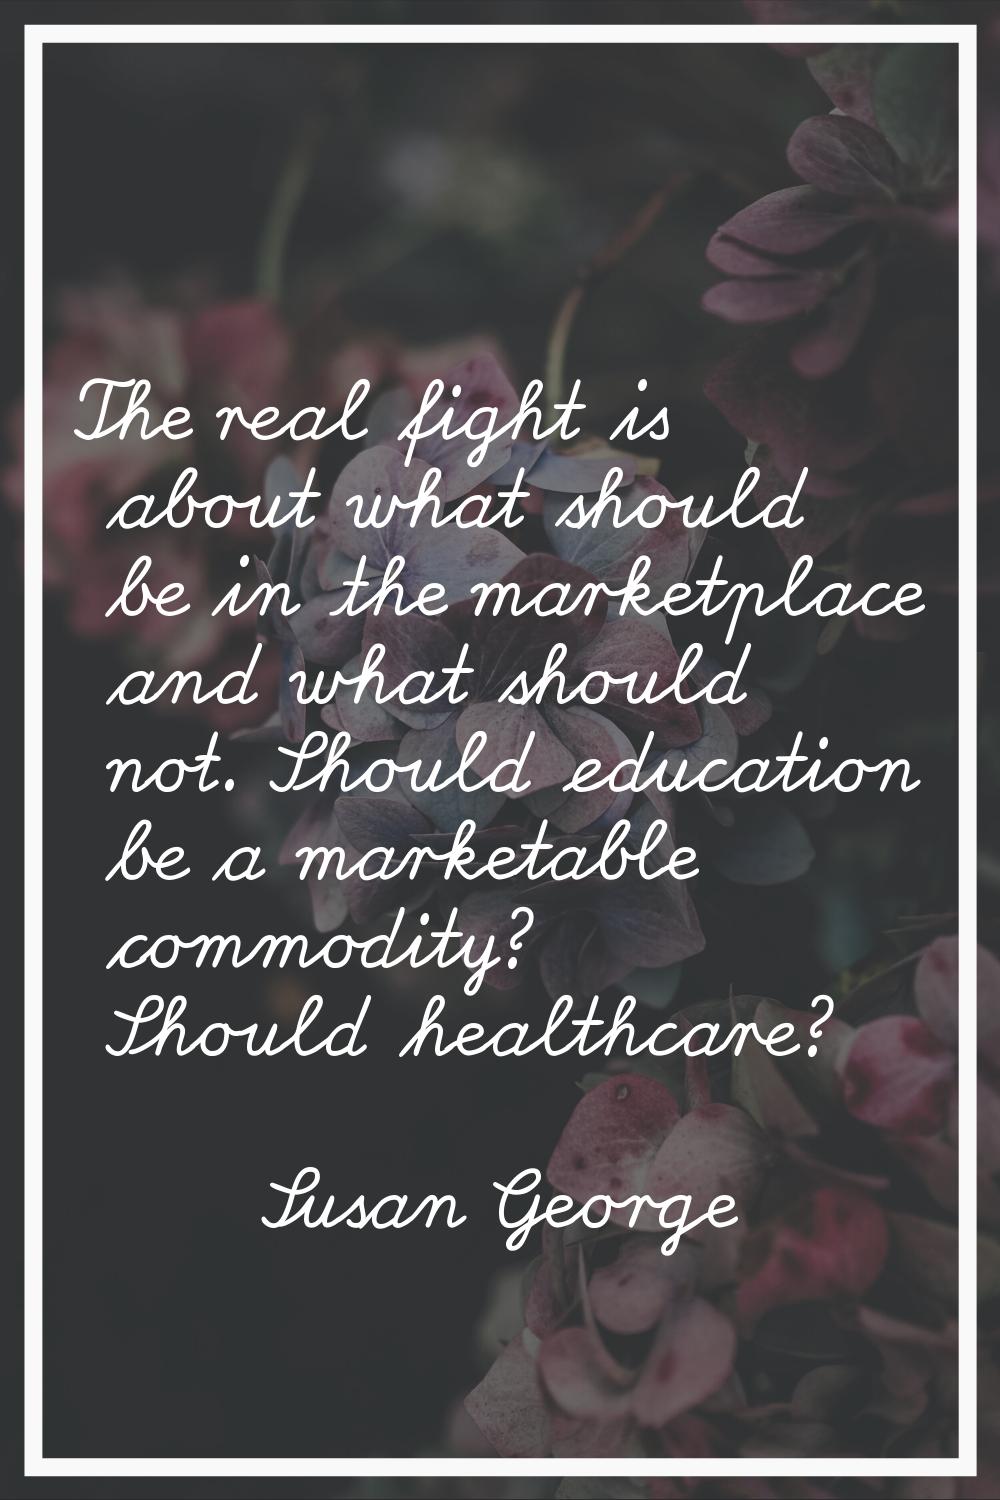 The real fight is about what should be in the marketplace and what should not. Should education be 